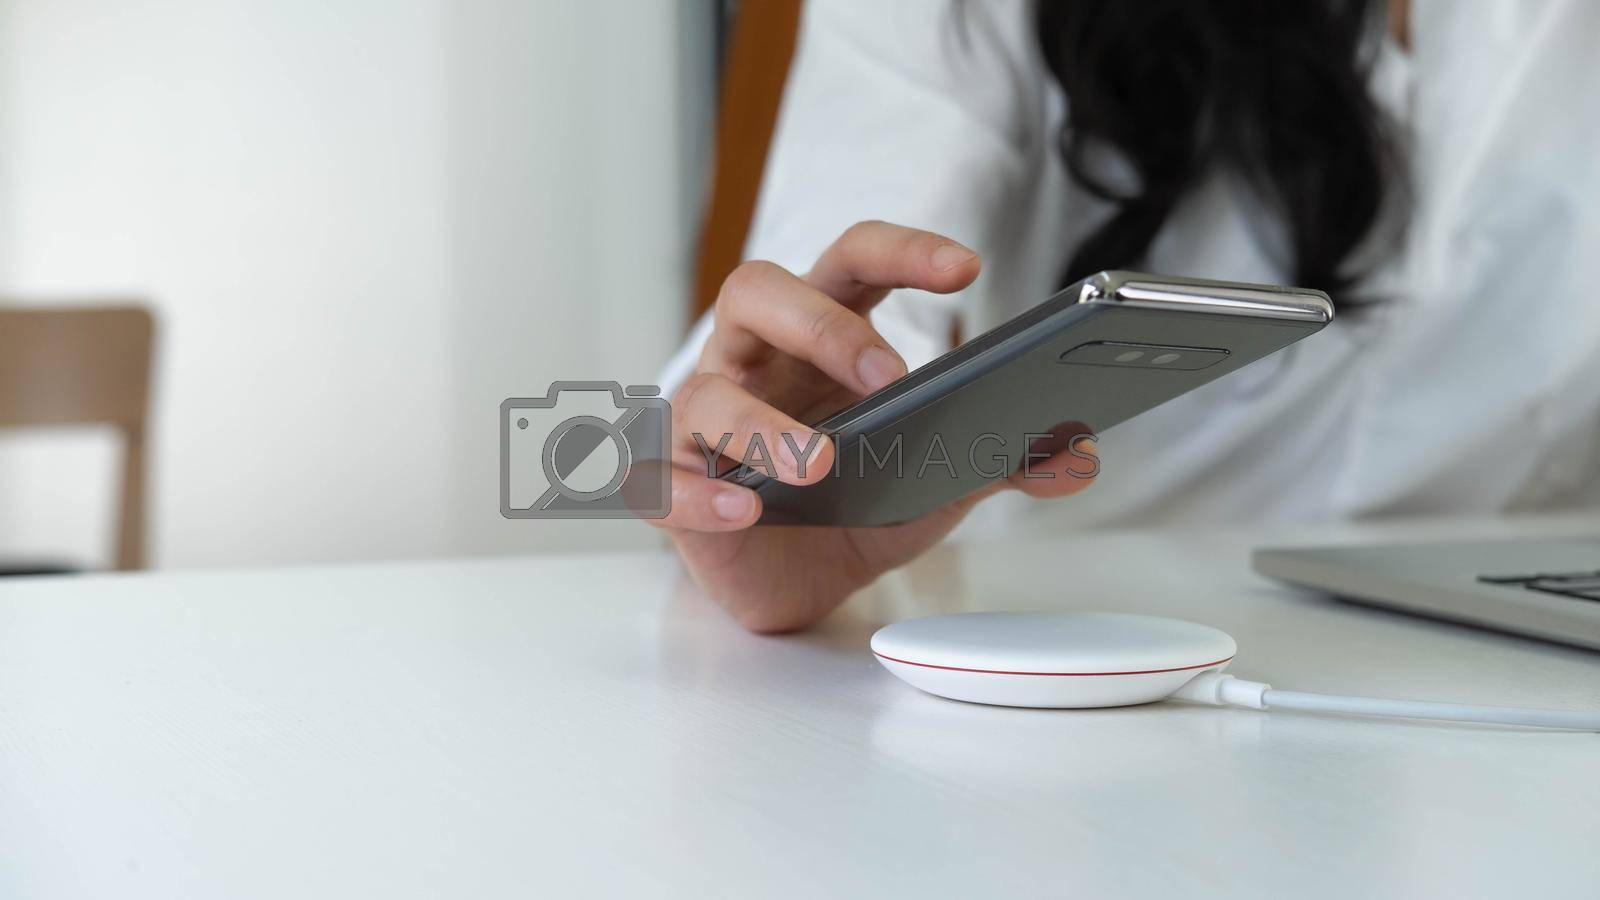 Royalty free image of Working Woman putting smartphone on wireless charger in office by nateemee